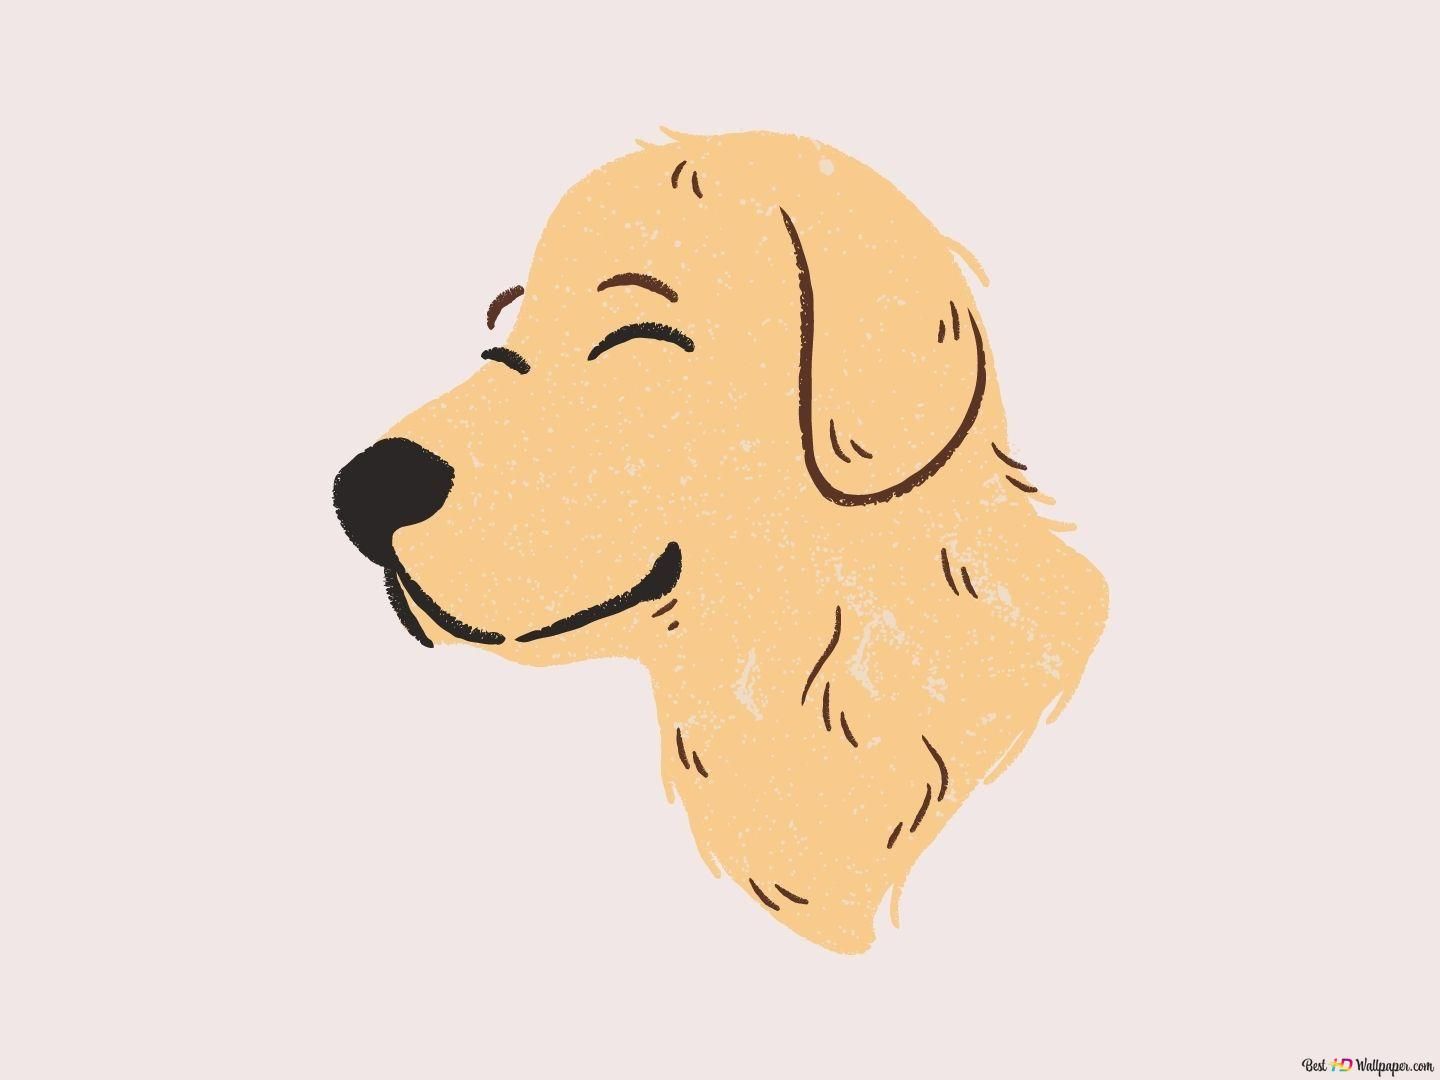 A drawing of a dog with its eyes closed - Dog, puppy